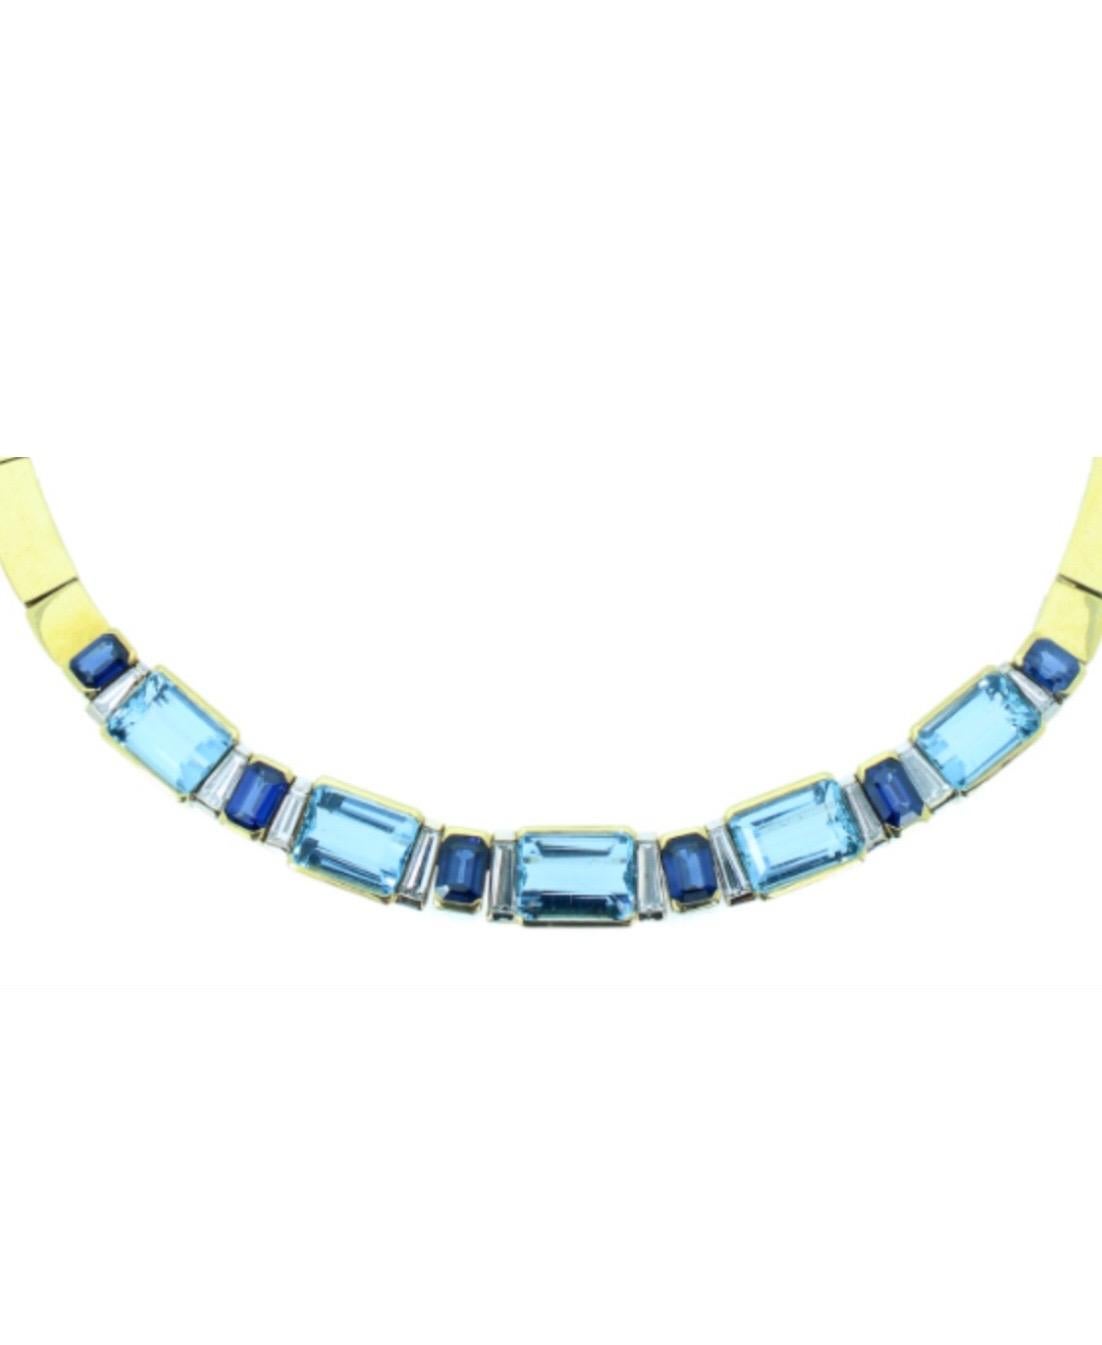 Unique Aquamarine, Sapphire and Diamond Necklace Circa 1970 In 18 Karat Yellow Gold, set with five emerald cut aquamarines totalling approximately 20.00 carats punctuated by sapphires totalling approximately 8.00 carats and tapering baguette cut